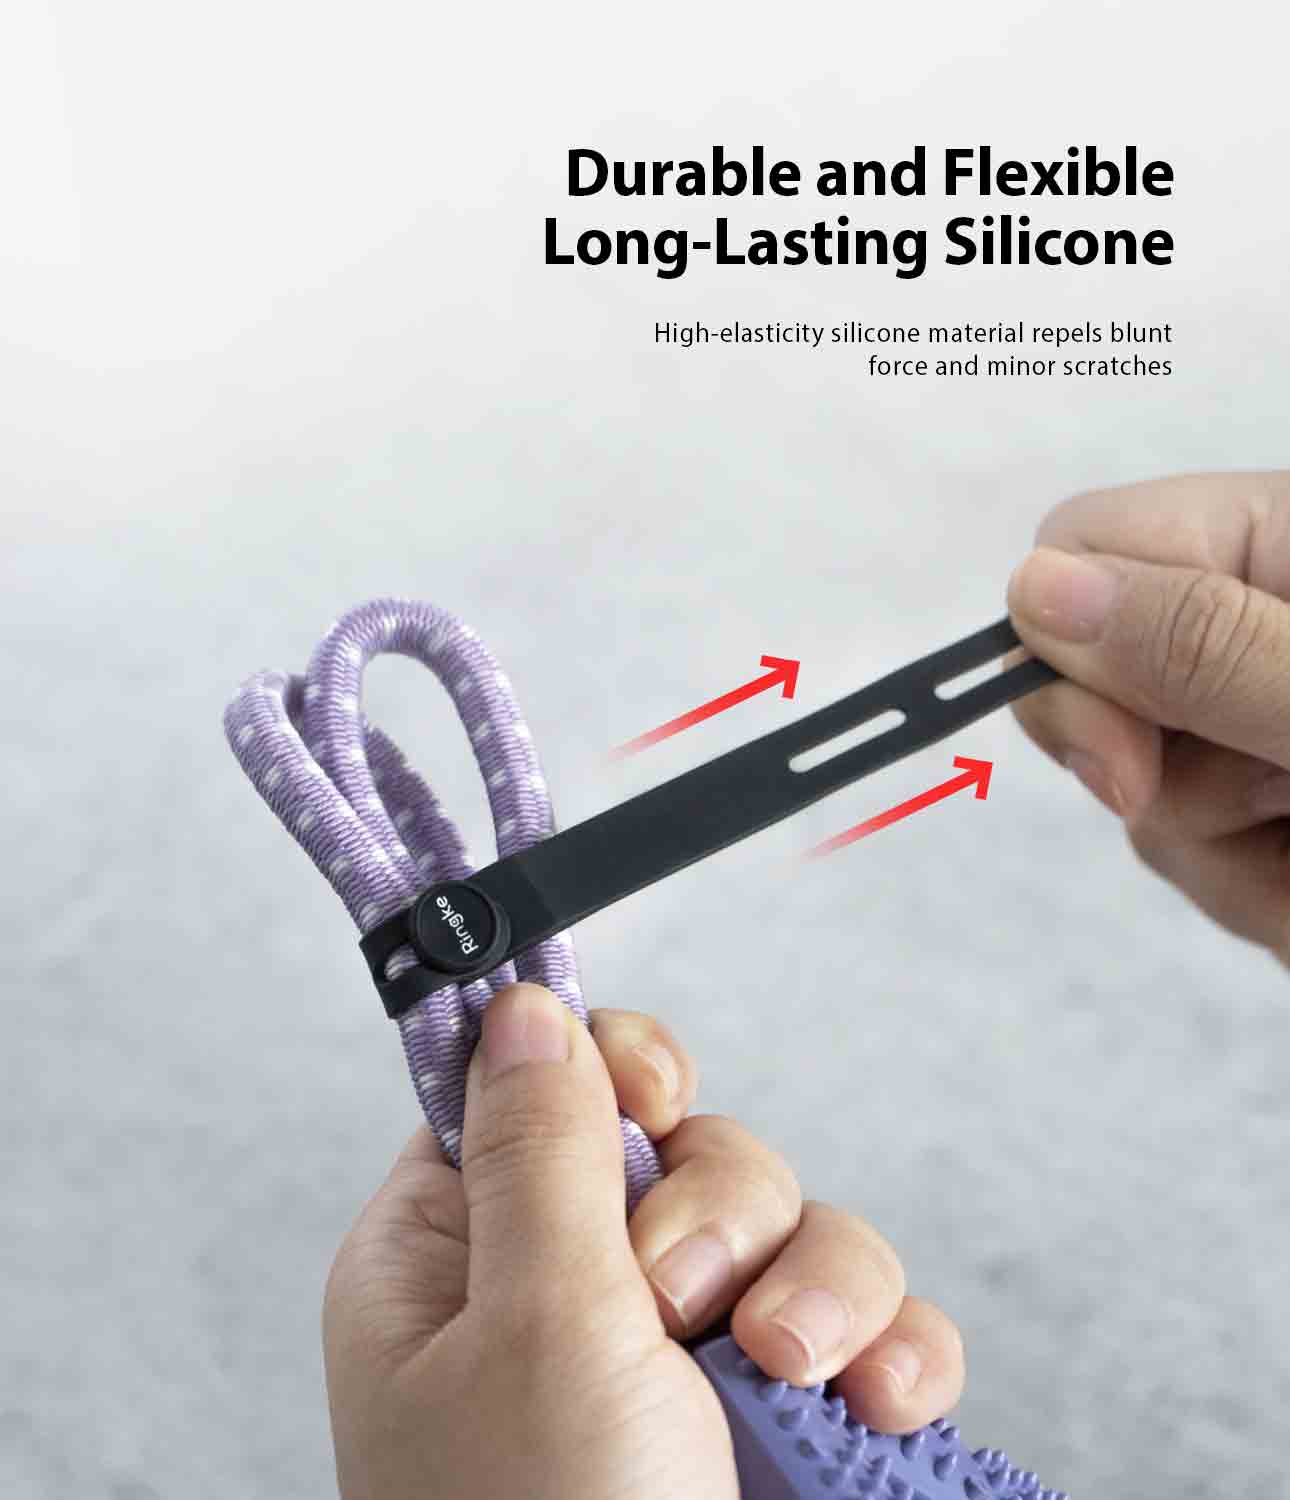 made with durable and flexible long lasting silicone